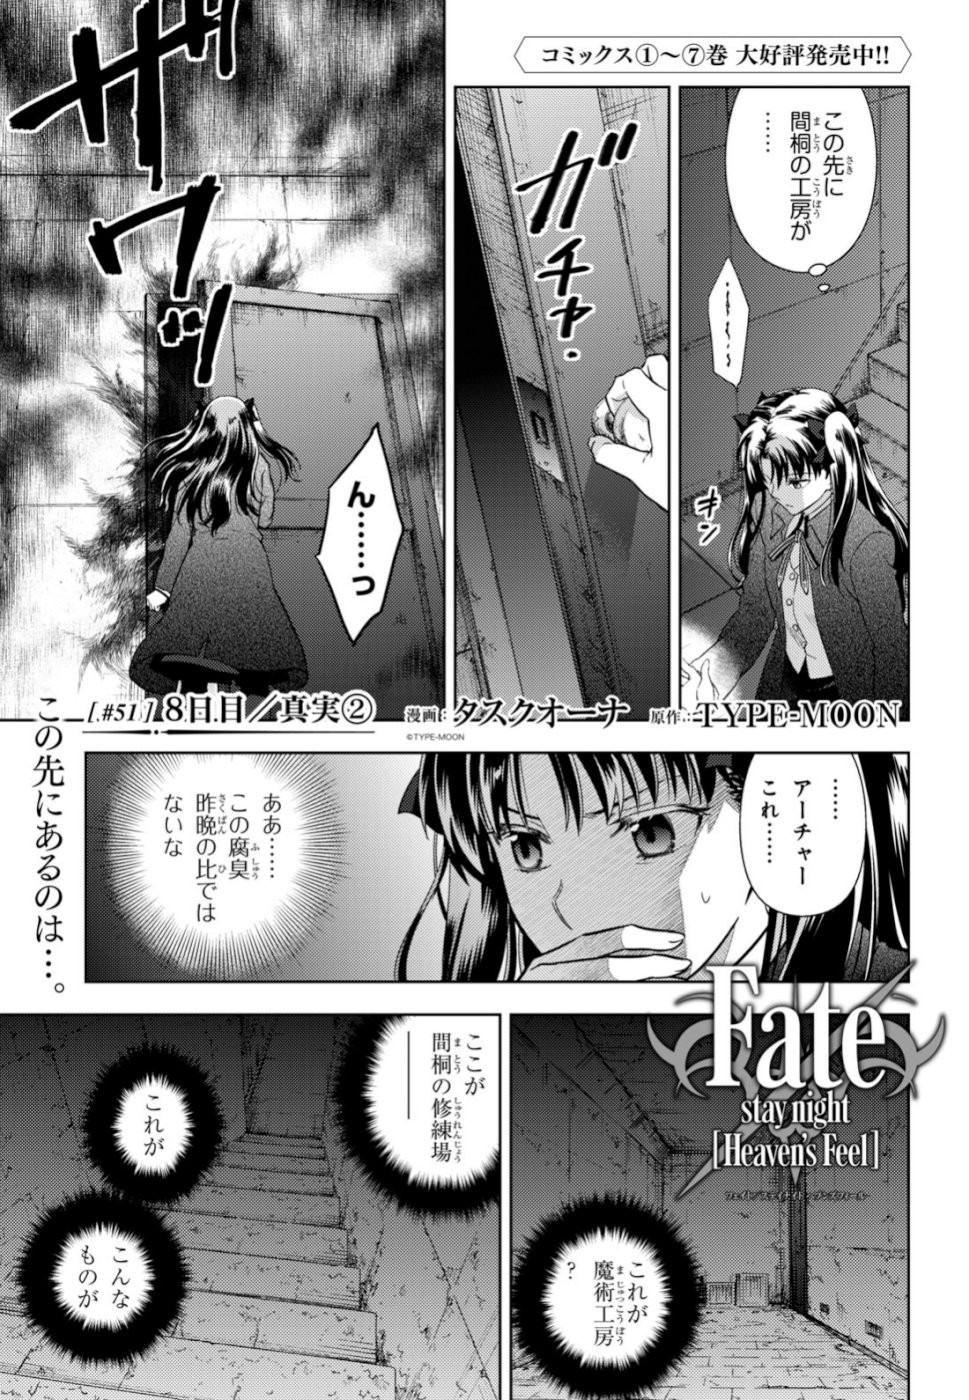 Fate/Stay night Heaven's Feel - Chapter 51 - Page 1